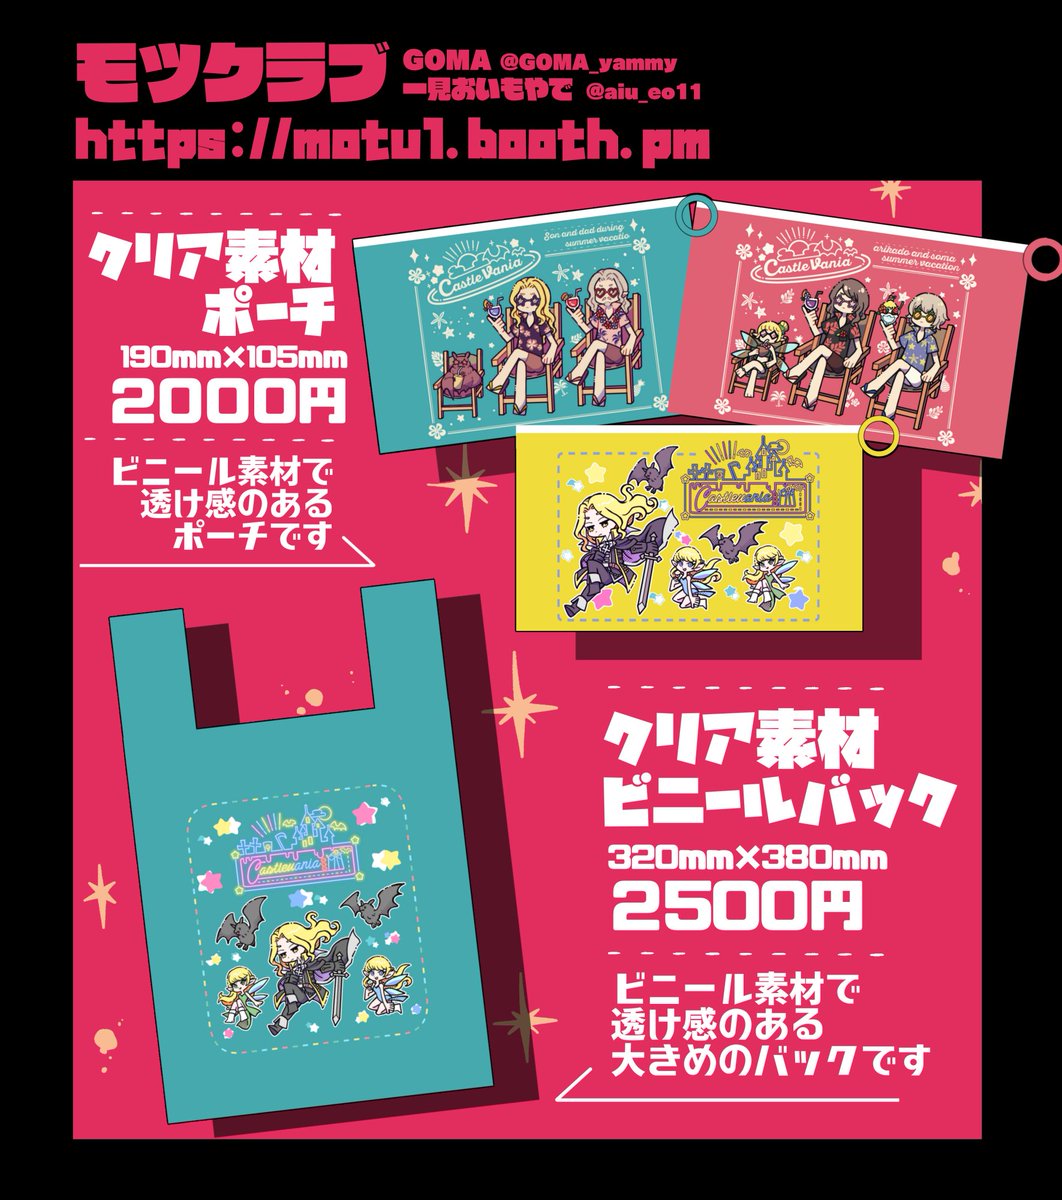 booth解放しました!グッズたくさんあります?
よろしくお願いします!
https://t.co/AxCslmiHts

Mail order notification:
Here is the link to my shop!>https://t.co/AxCslmiHts
Click here for BOOTH overseas shipping! > https://t.co/DDF2EFvGq9…

#オン魔城 #オン魔城2 (@daemonCastle) 